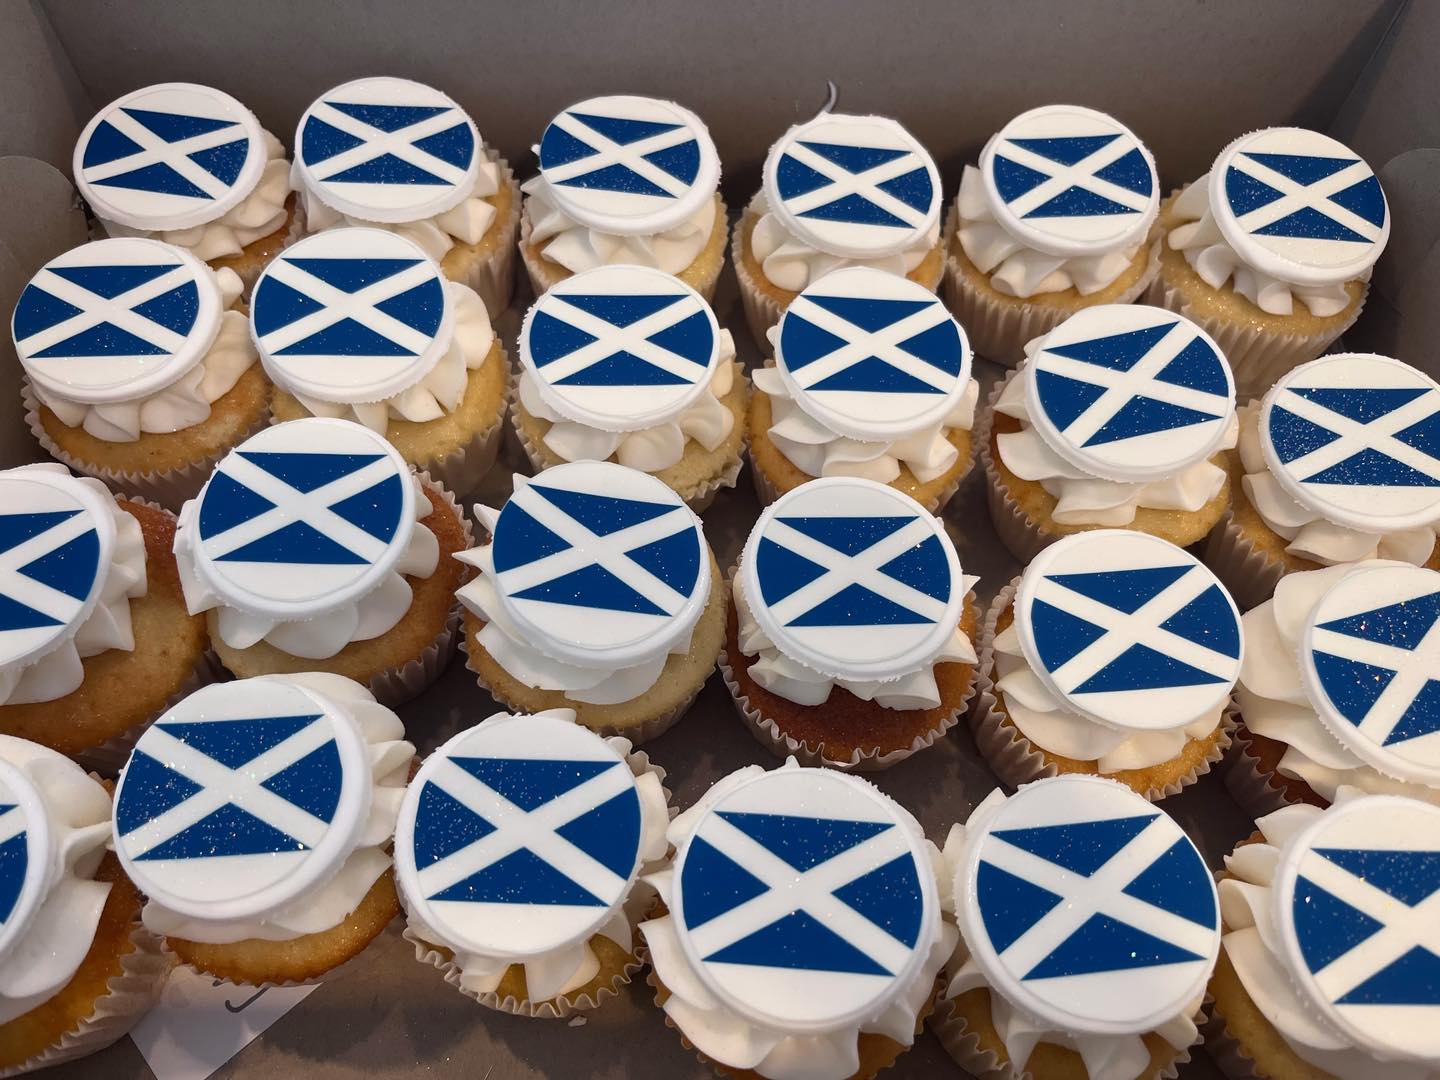 Scottish cupcakes, corporate cupcakes, function cupcakes, birthday cupcakes, cupcakes, cape town cupcakes, novelty cupcakes, southern peninsula, baby shower cupcakes